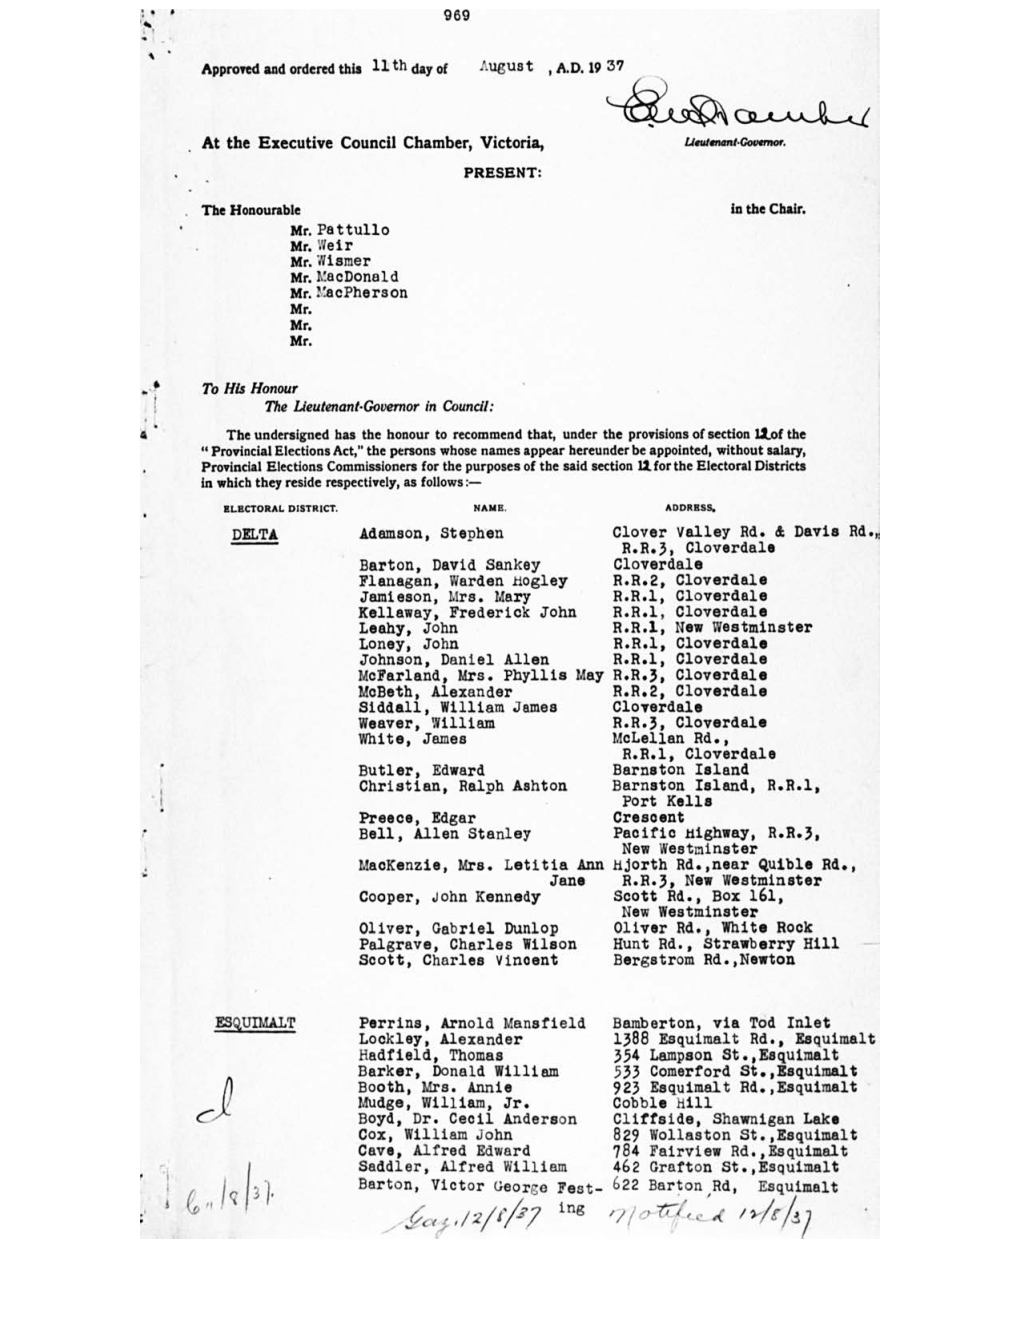 Order in Council 969/1937